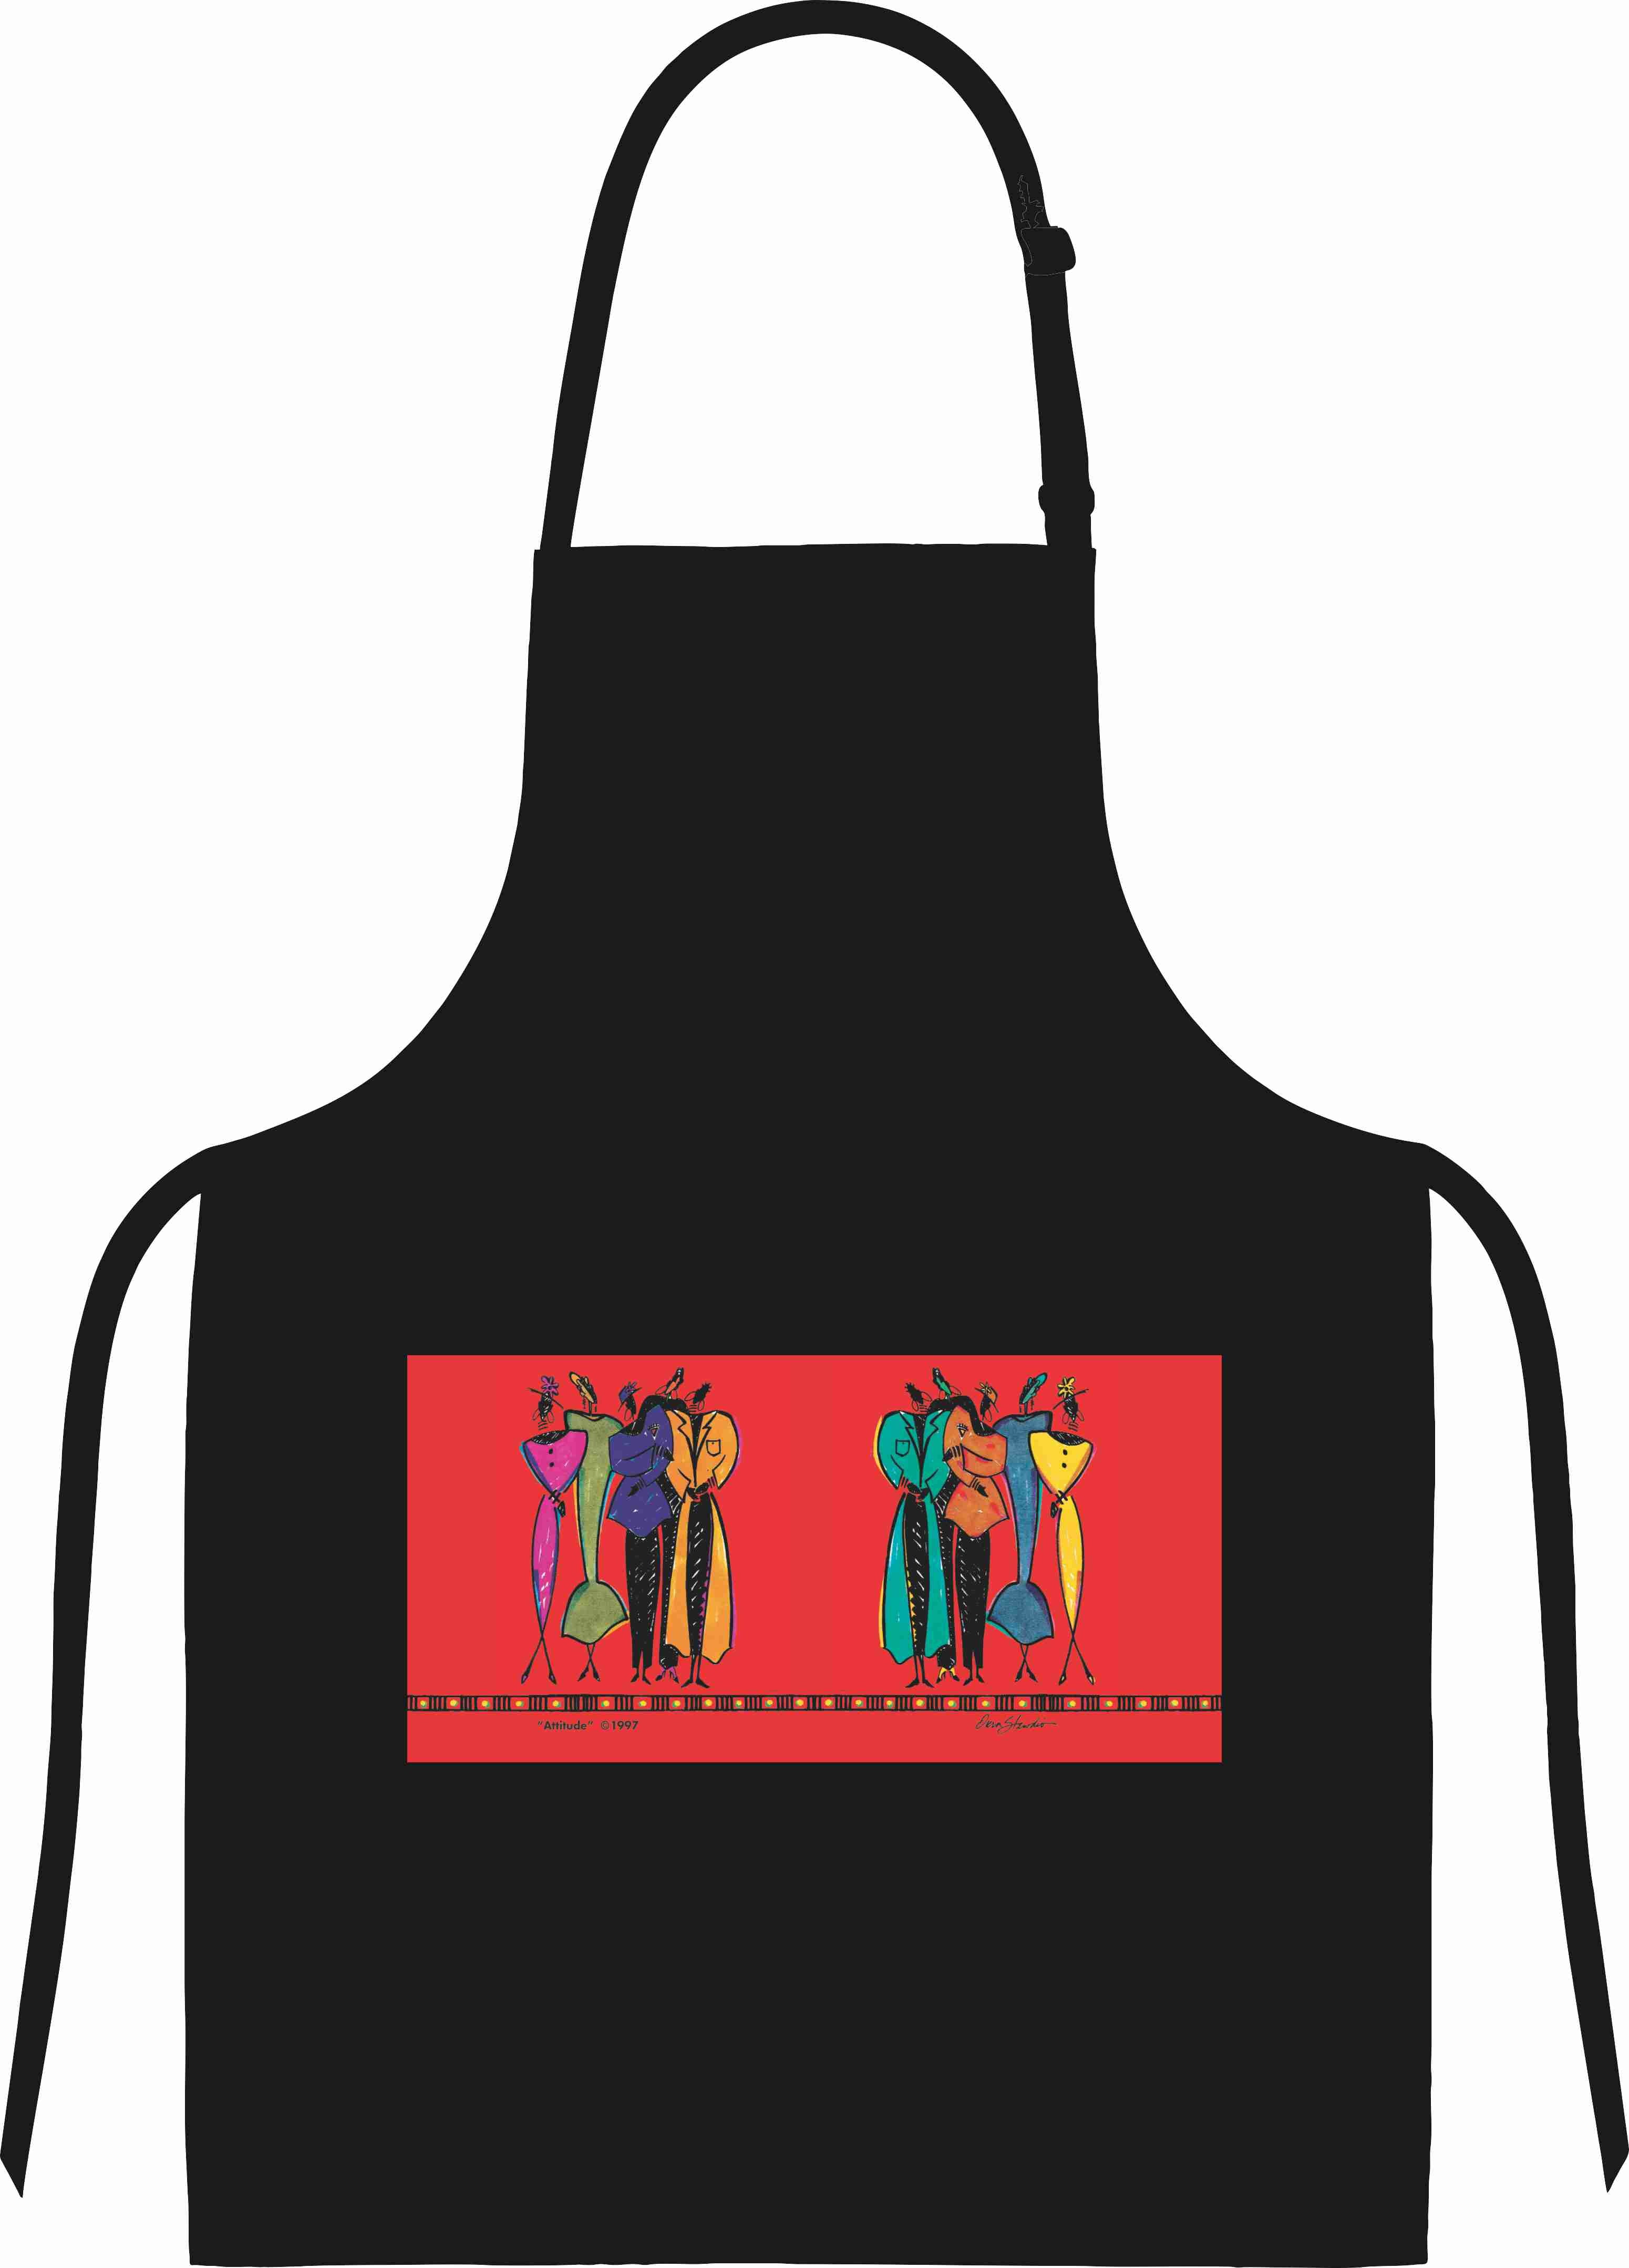 OAS Bags & Aprons #